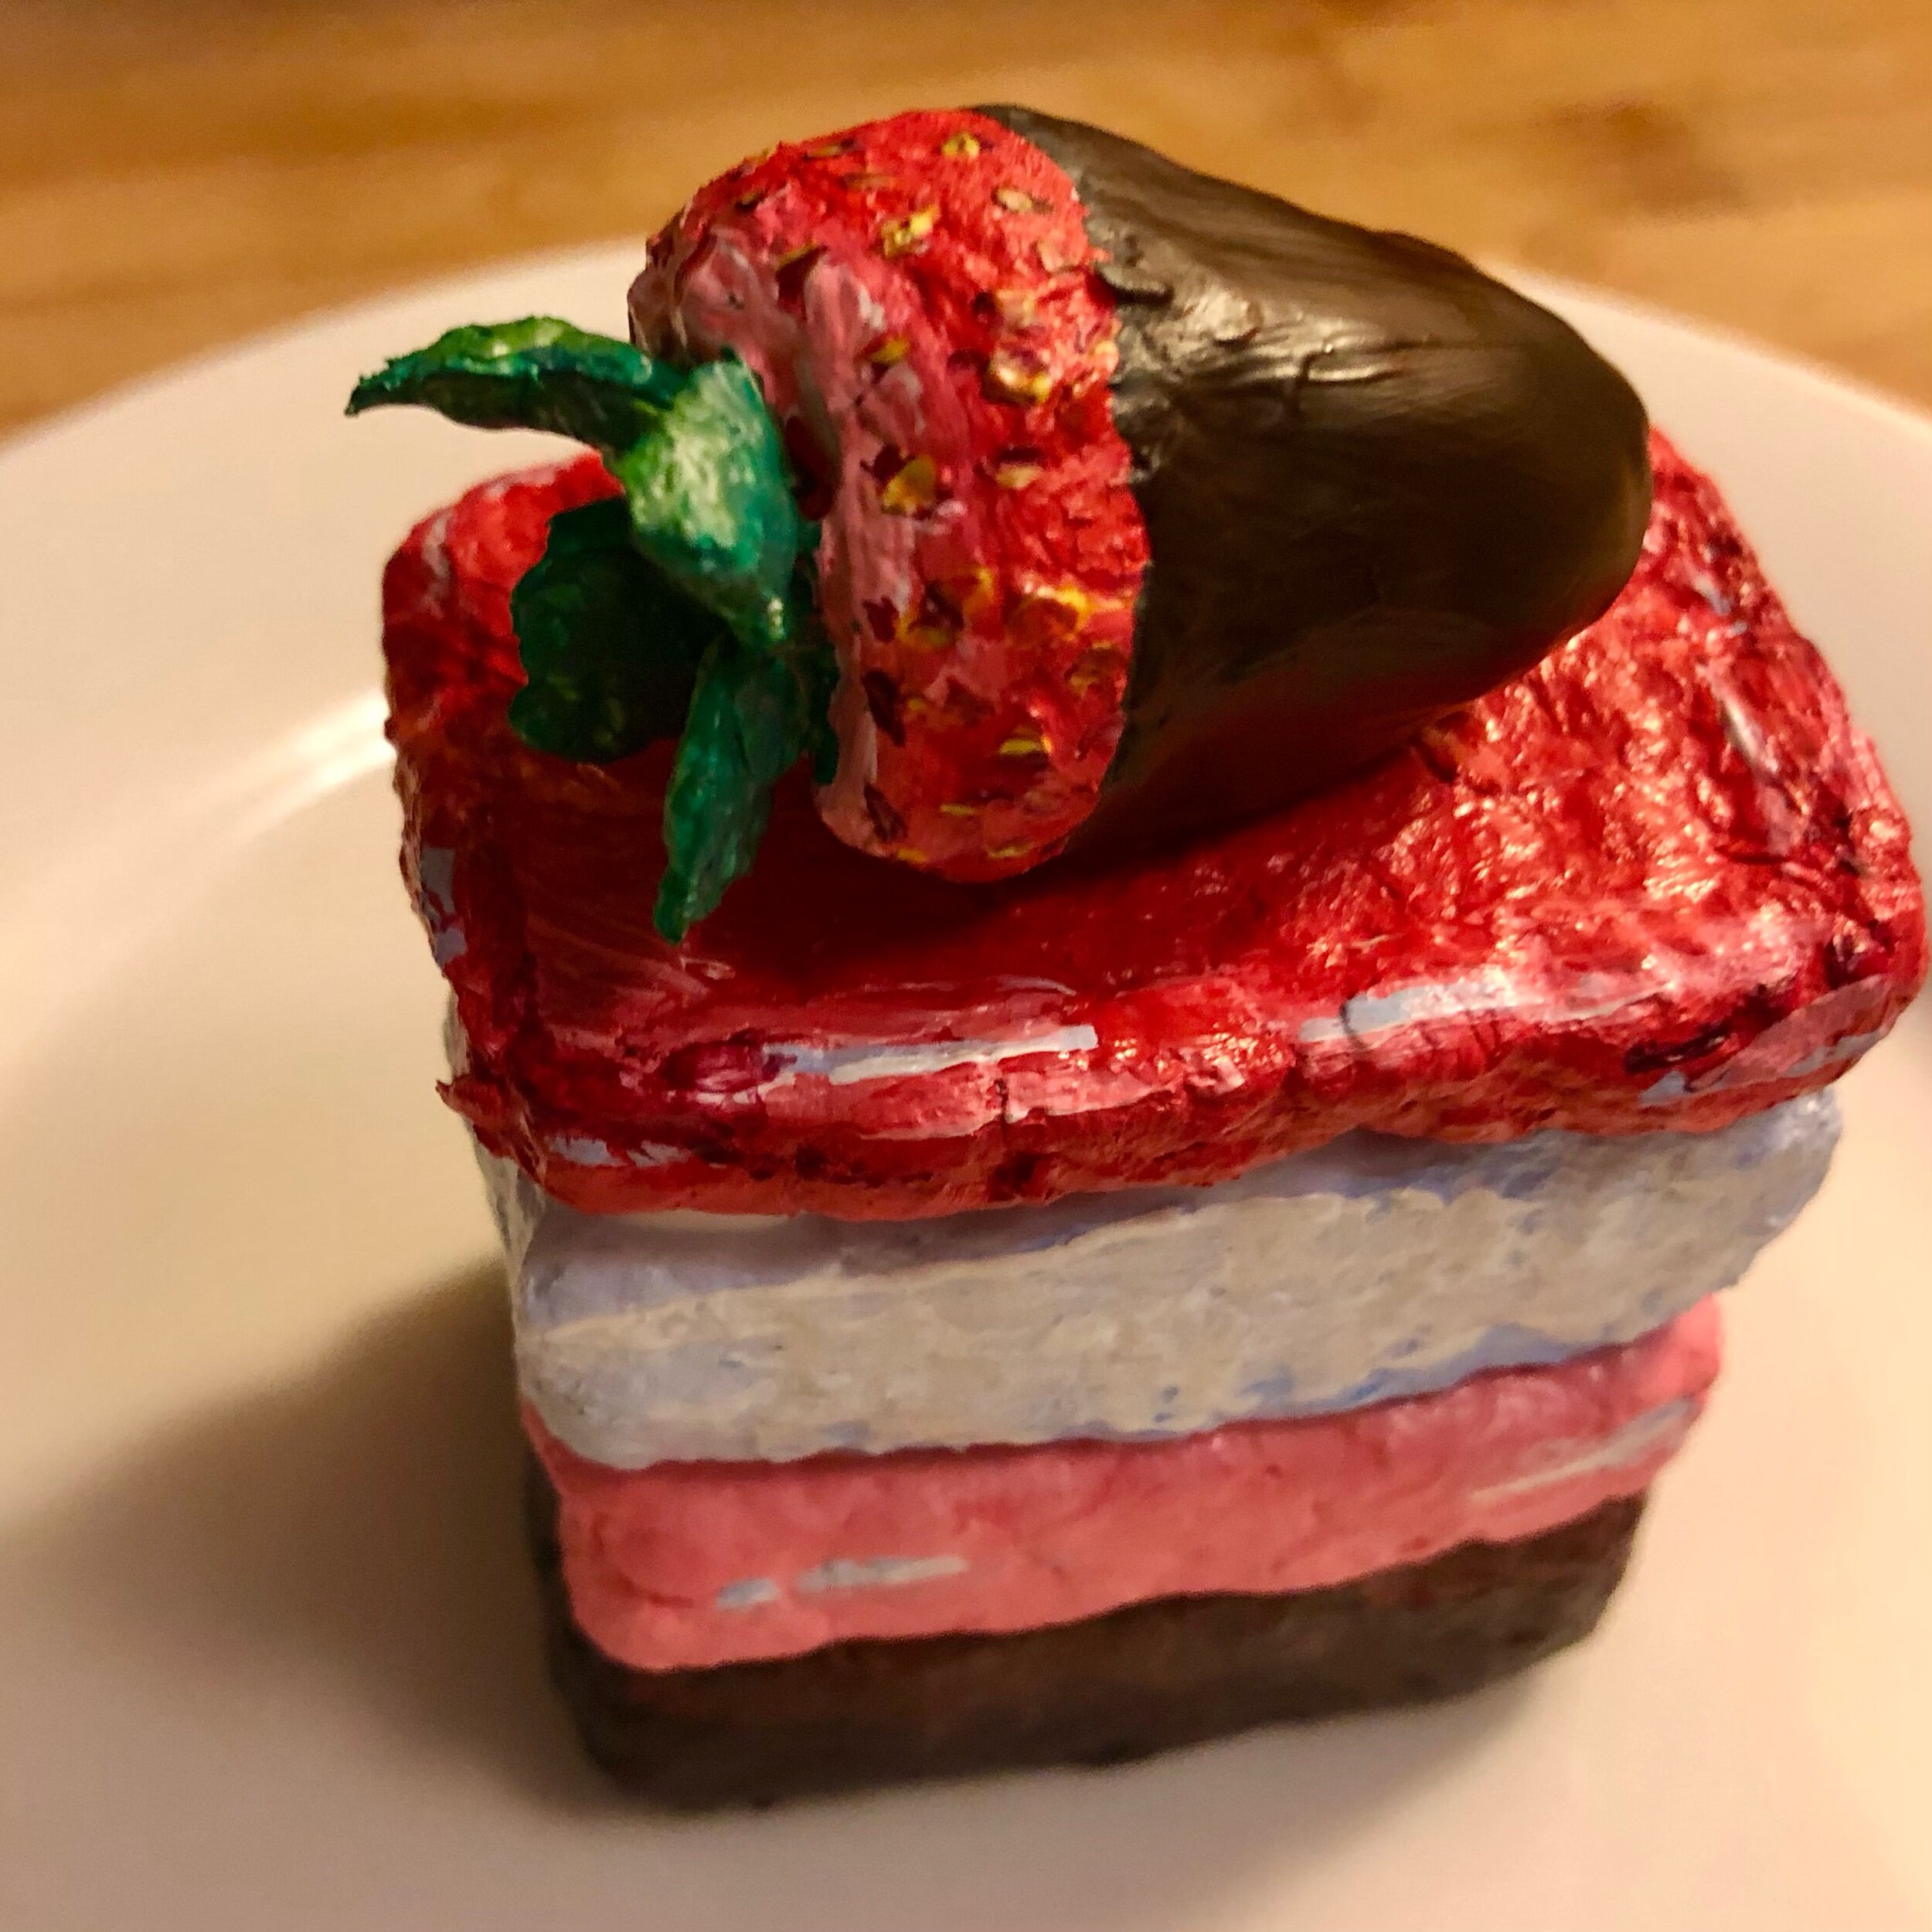 Tiered dessert with chocolate dipped strawberry 